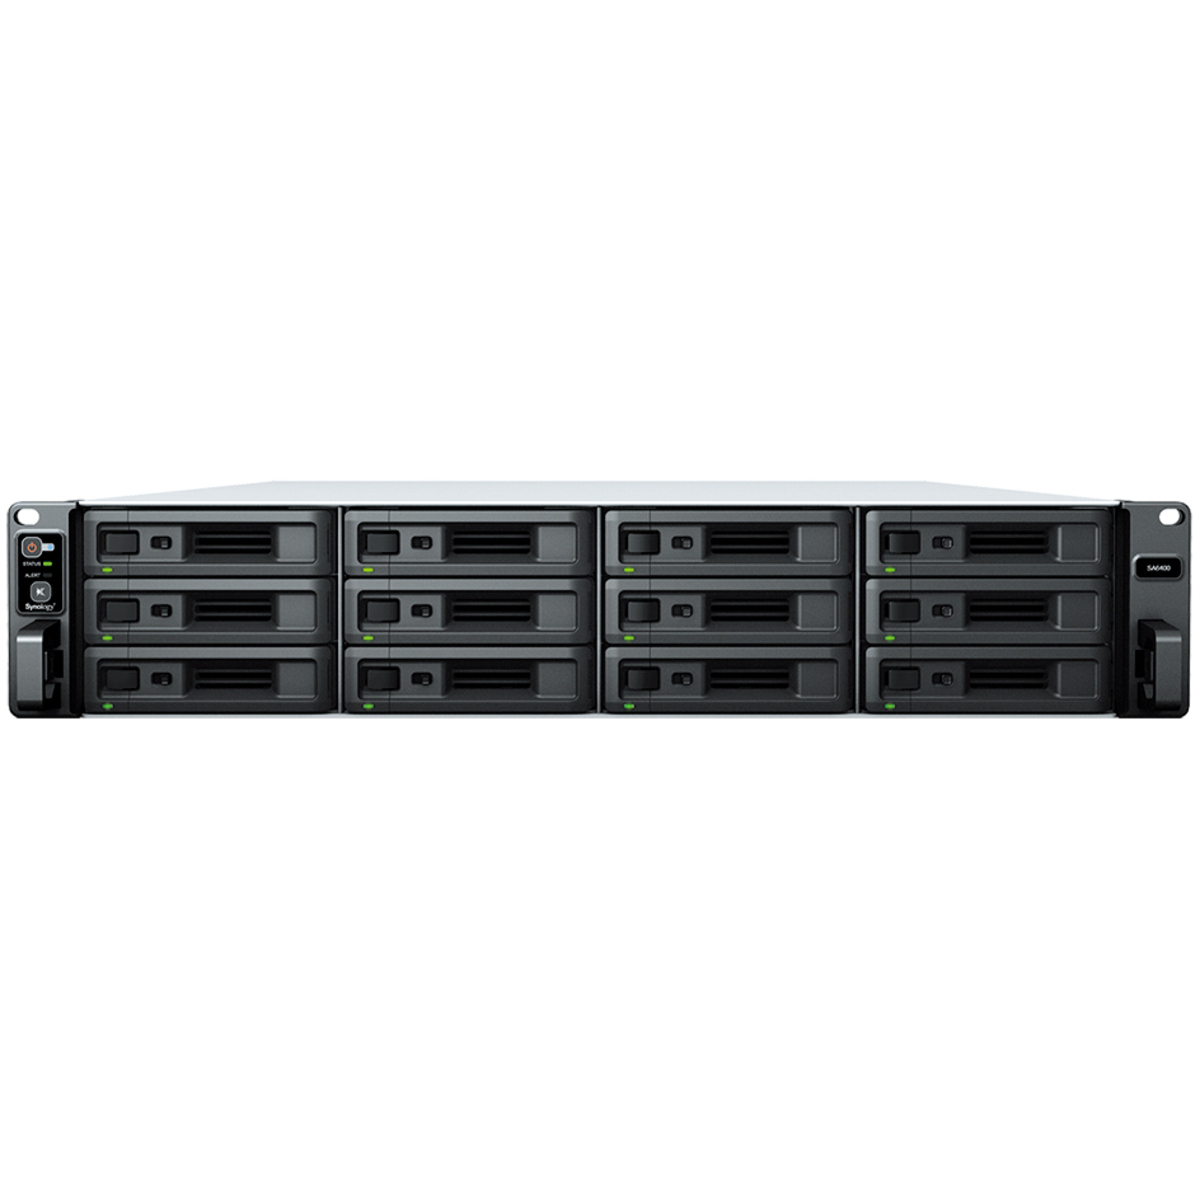 Synology RackStation SA6400 126tb 12-Bay RackMount Large Business / Enterprise NAS - Network Attached Storage Device 7x18tb Western Digital Red Pro WD181KFGX 3.5 7200rpm SATA 6Gb/s HDD NAS Class Drives Installed - Burn-In Tested RackStation SA6400